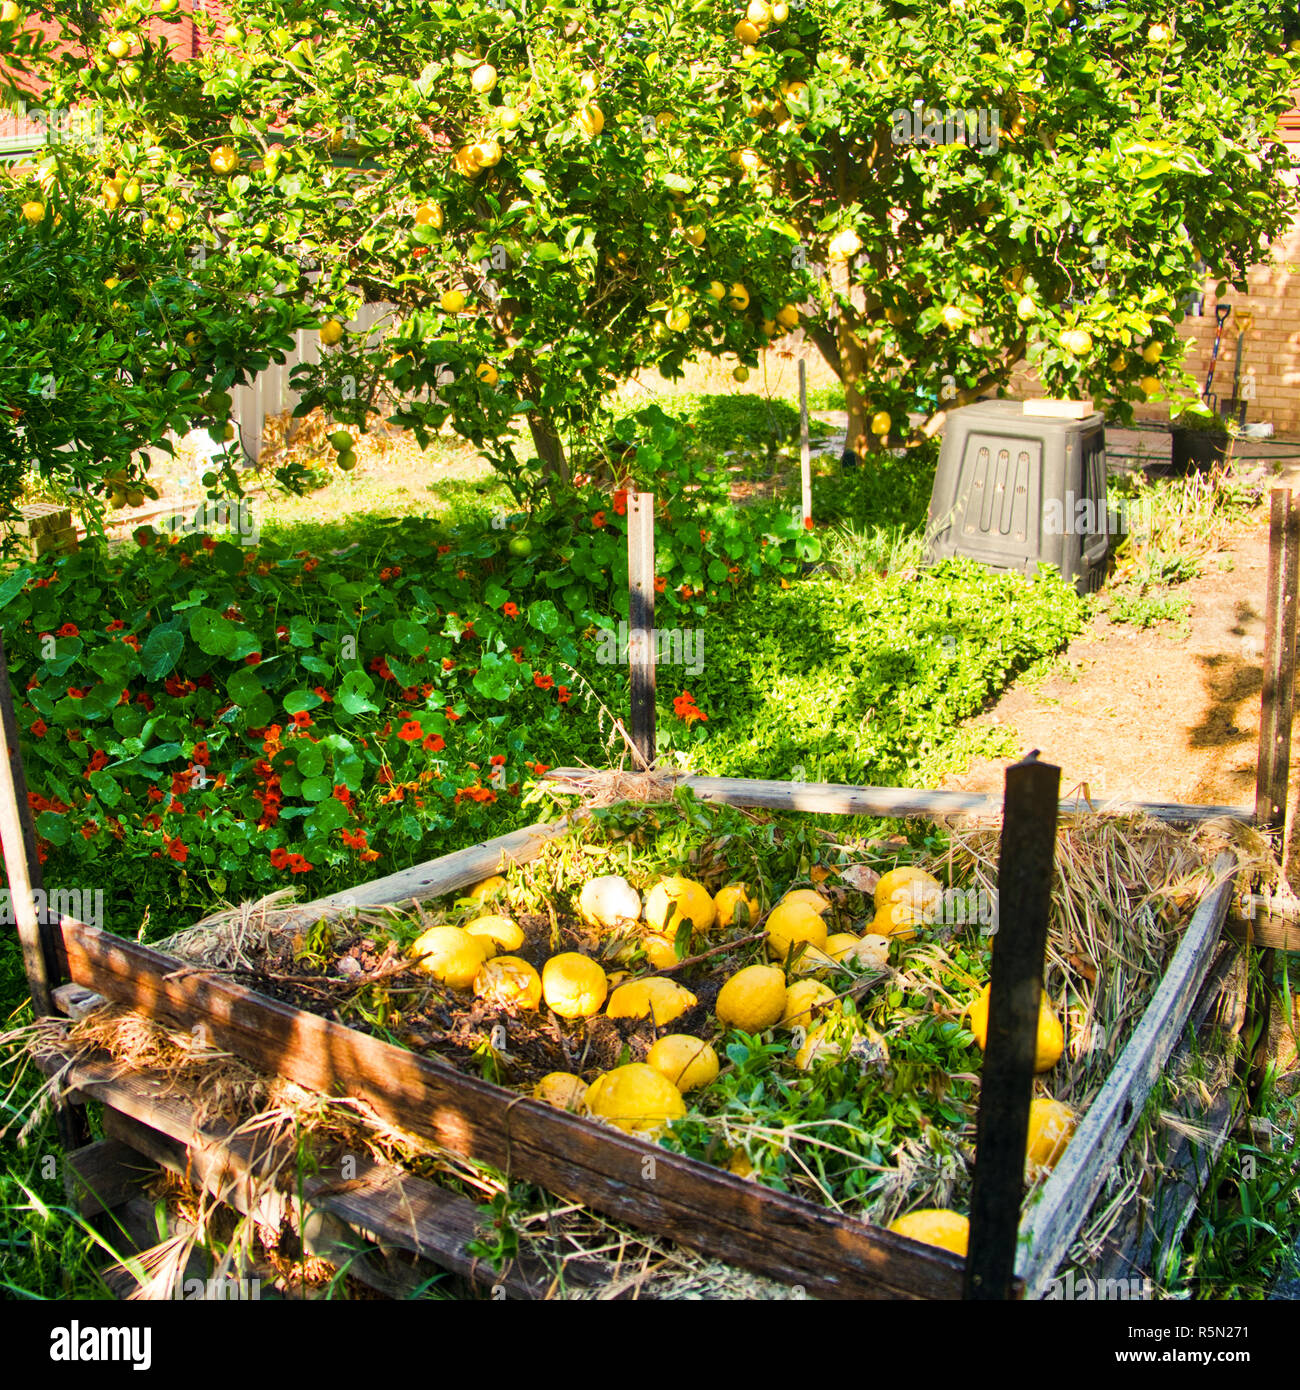 excess lemons on top of compost heap Stock Photo